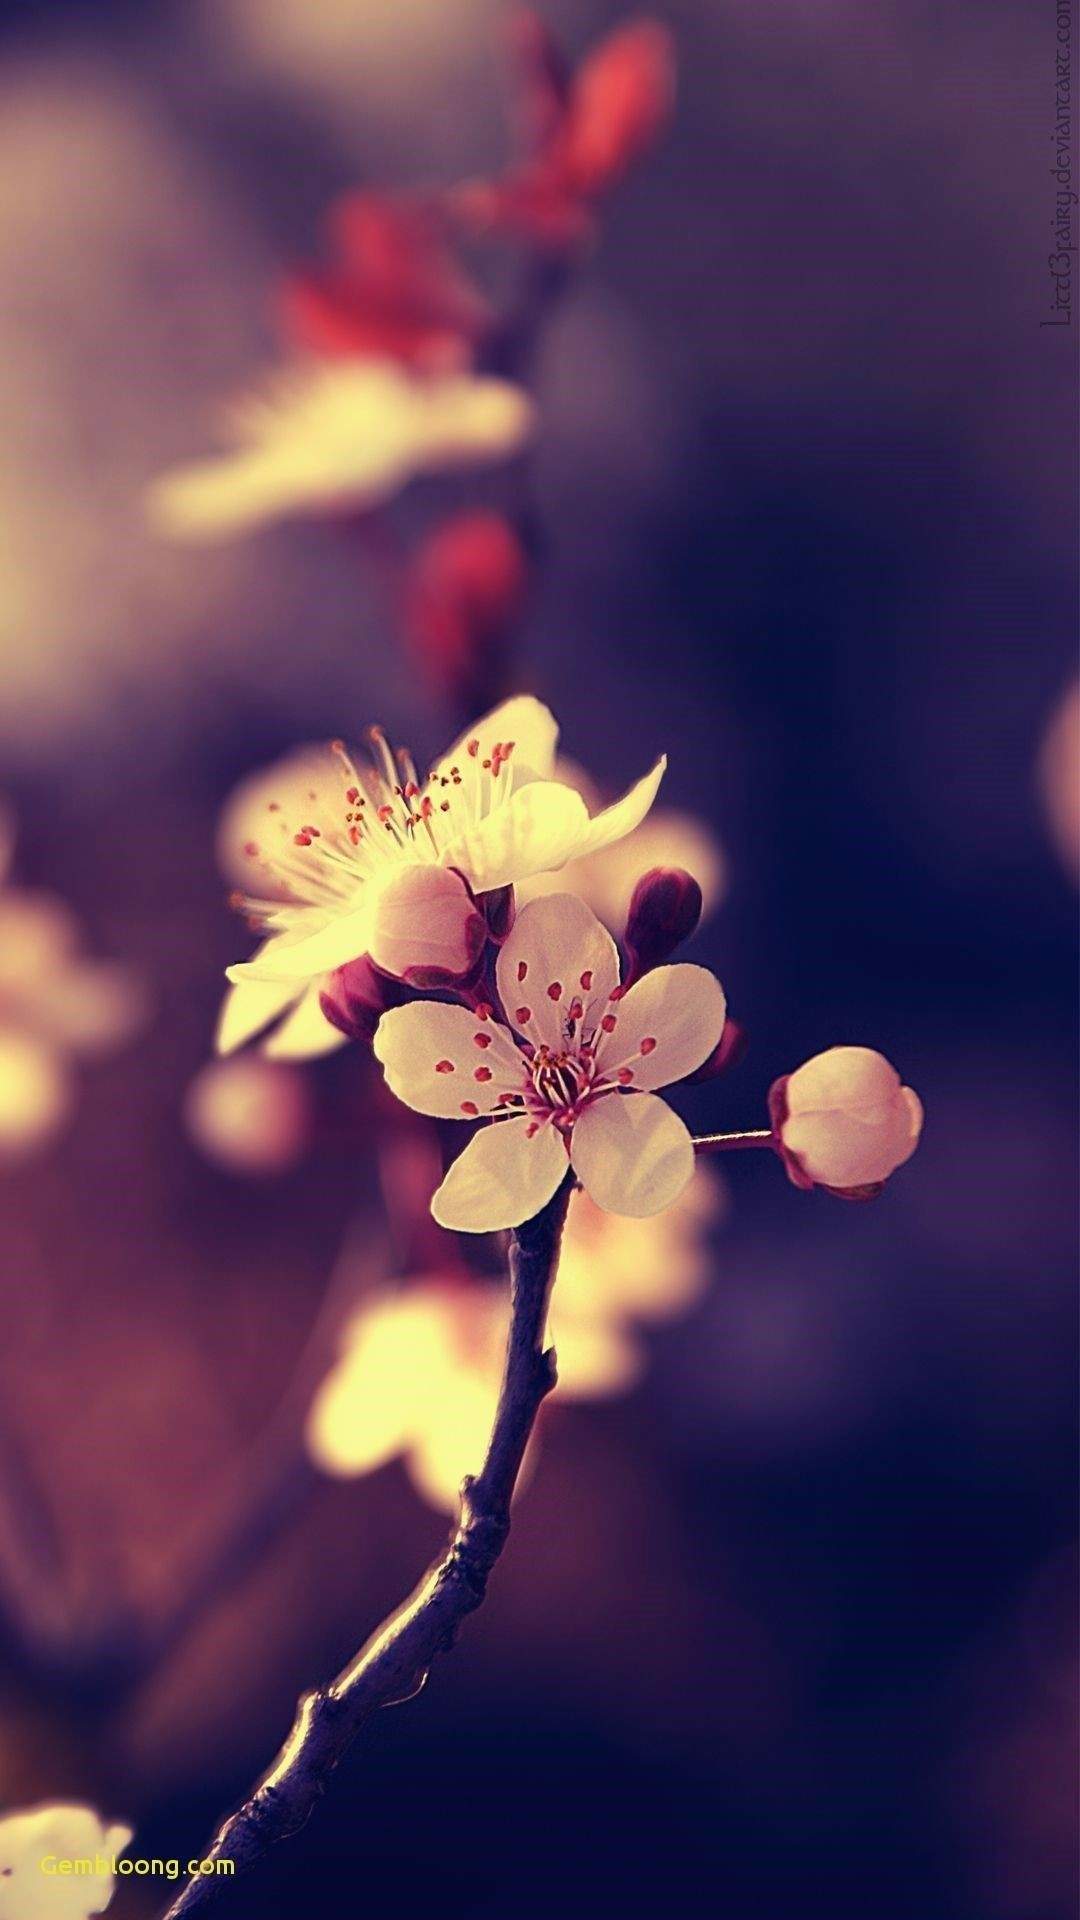 beautiful flowers wallpapers for mobile,nature,flower,petal,spring,blossom